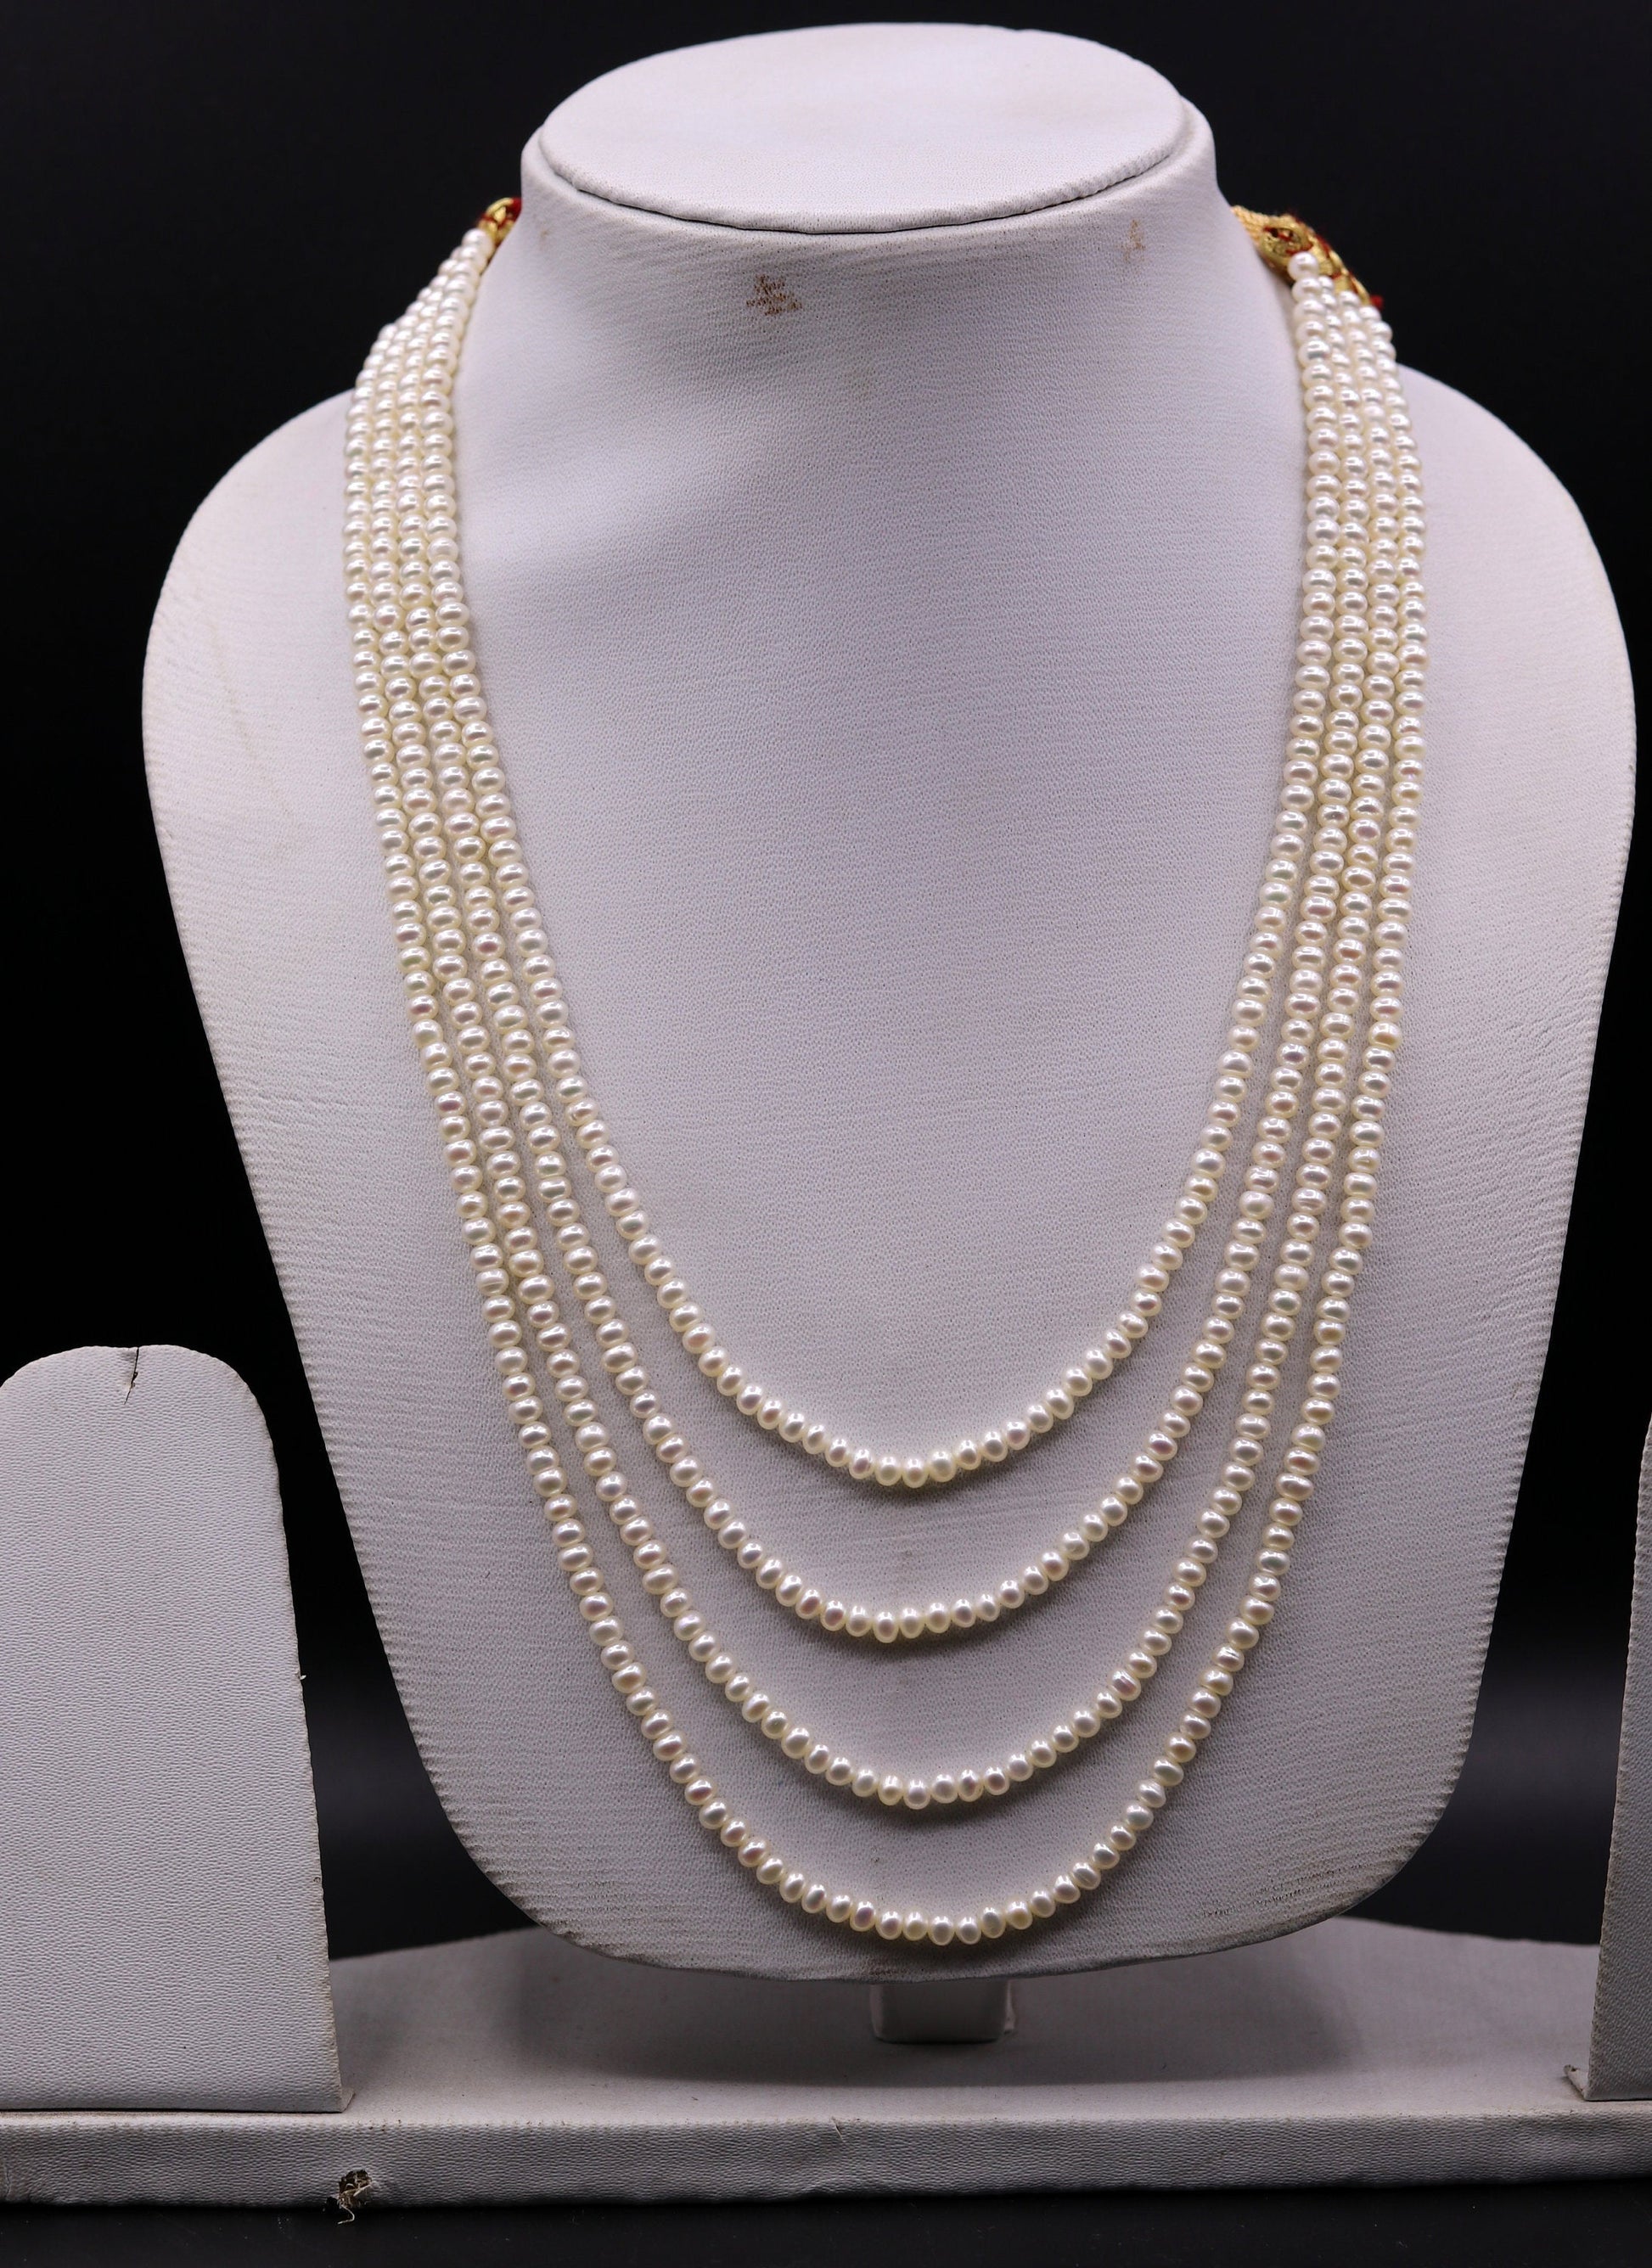 Natural real pearl 4 mm  four line layer string necklace set gorgeous wedding or daily use necklace jewelry from india belly dance set35 - TRIBAL ORNAMENTS